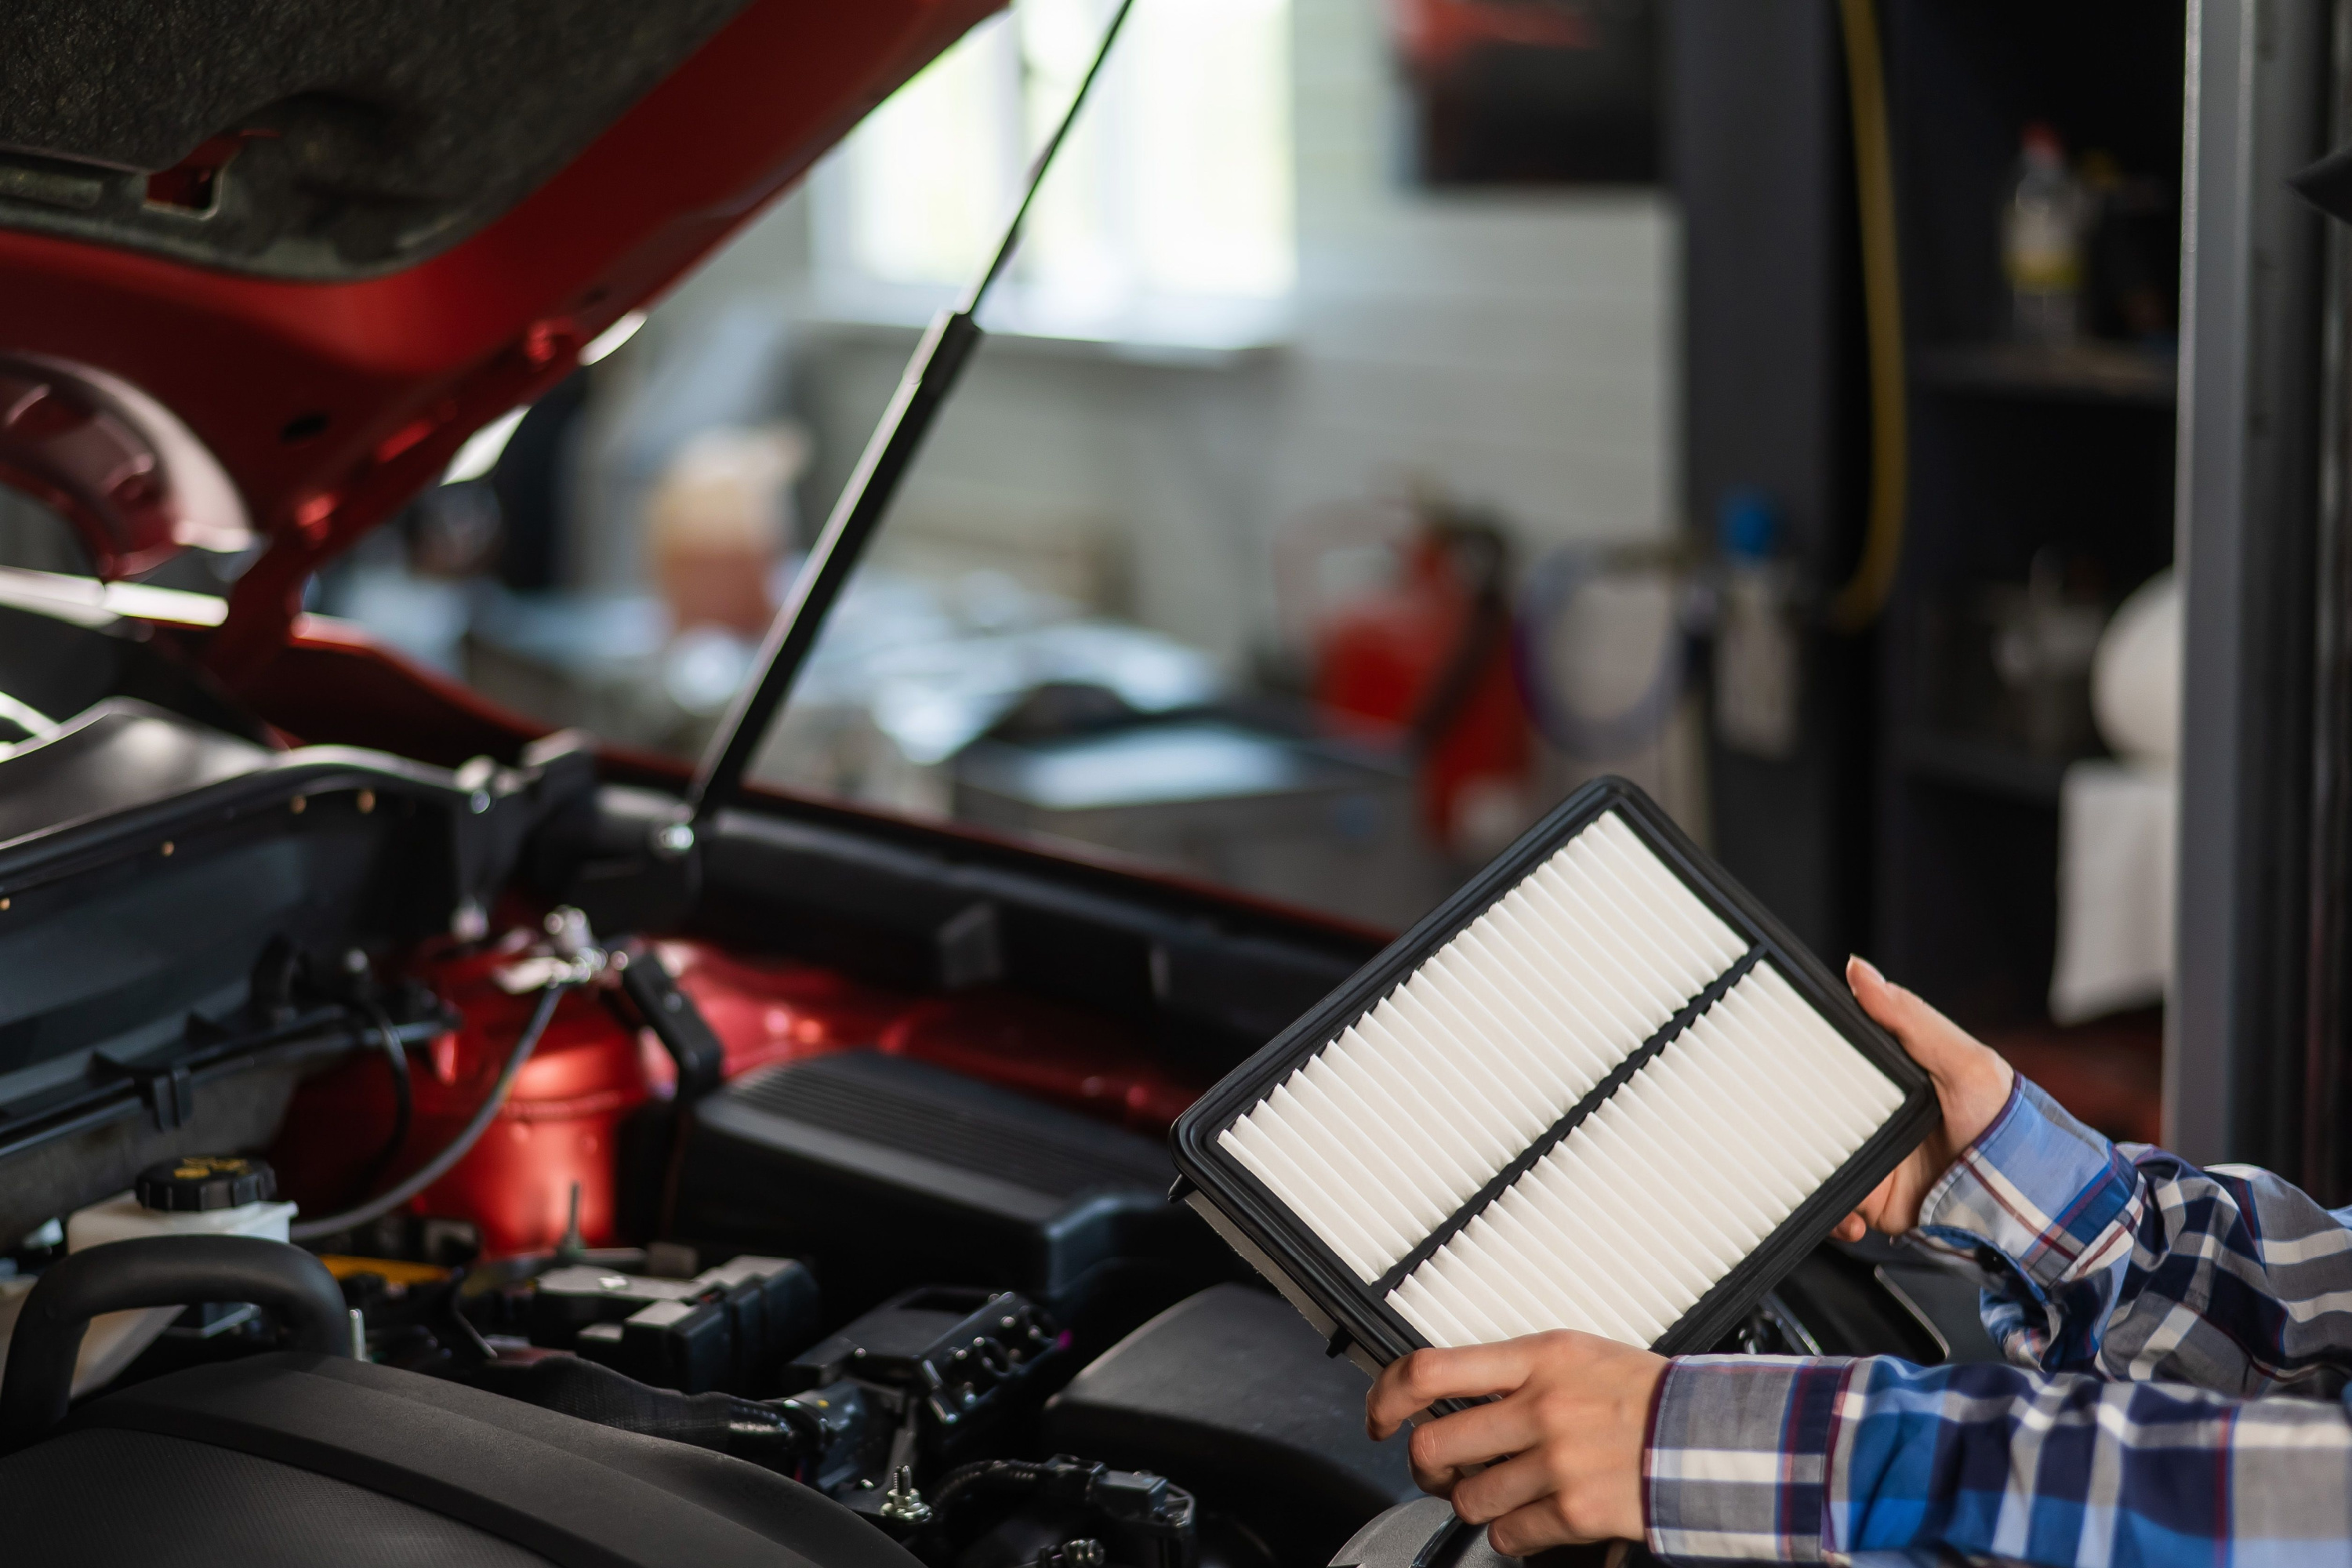 FIVE IMPORTANT THINGS ABOUT YOUR VEHICLE'S ENGINE AIR FILTER